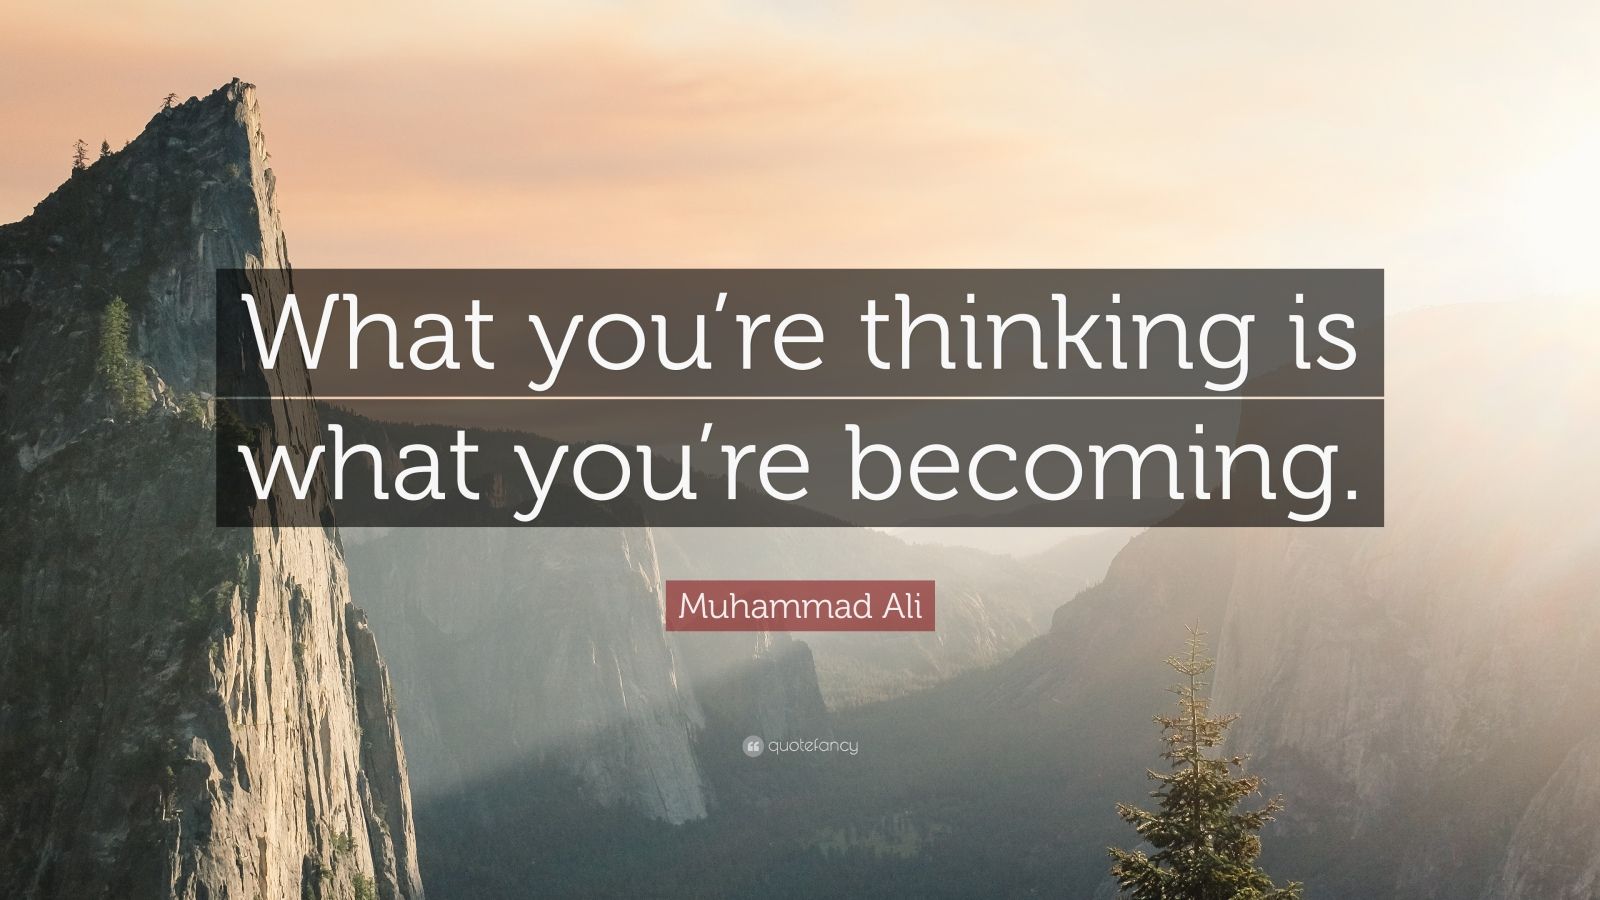 Muhammad Ali Quote: “What you’re thinking is what you’re becoming.” (22